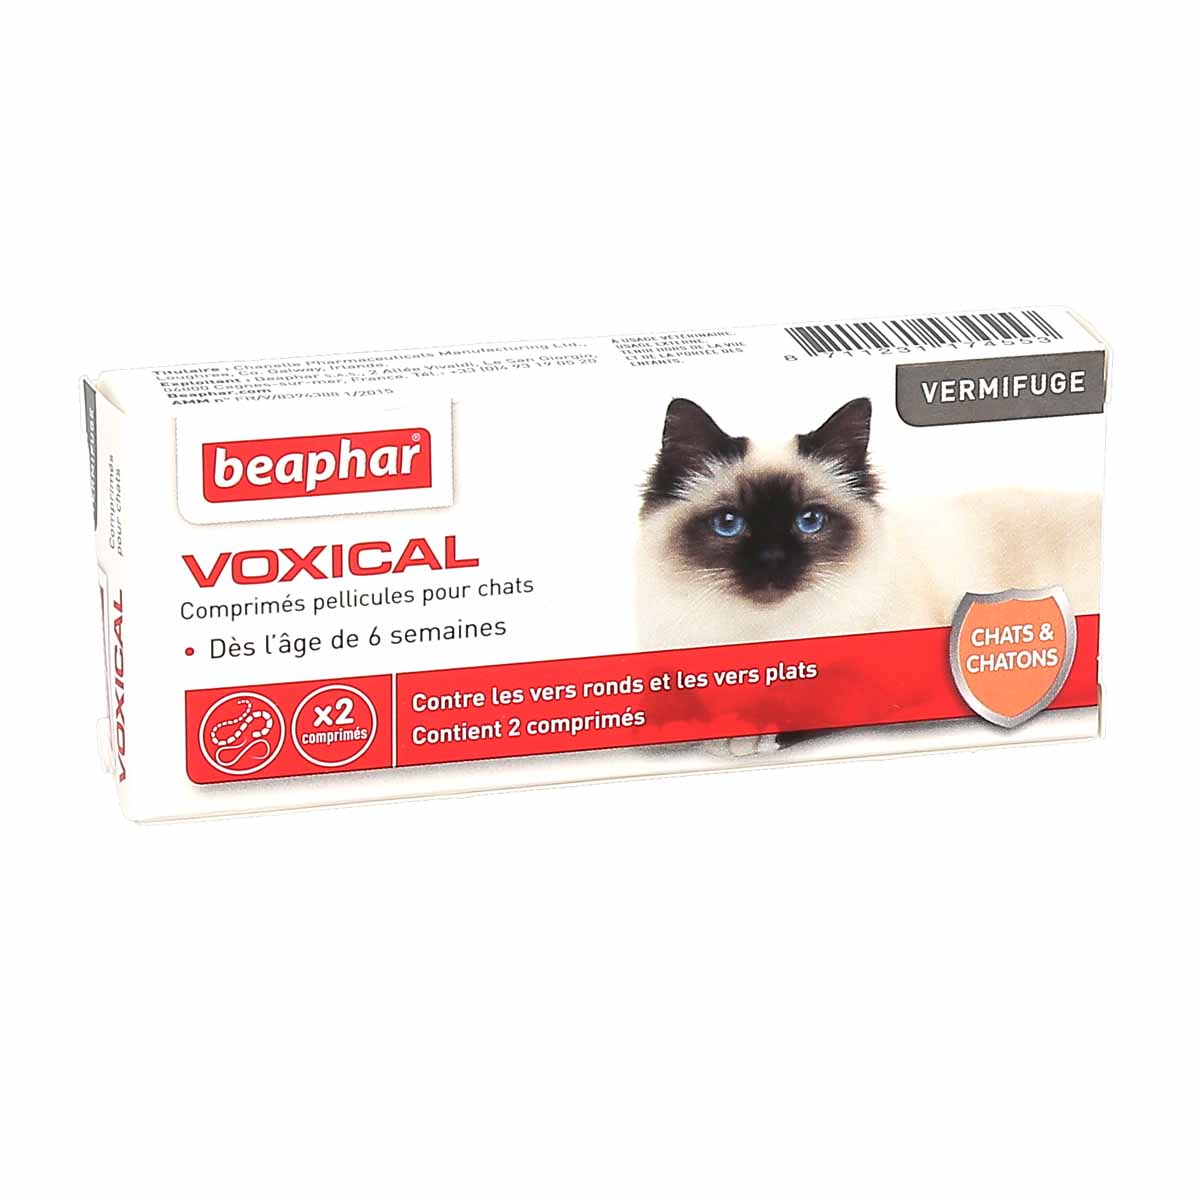 BEAPHAR VOXICAL Chat et Chaton Bte/2 - Vermifuge Vers Ronds, Vers